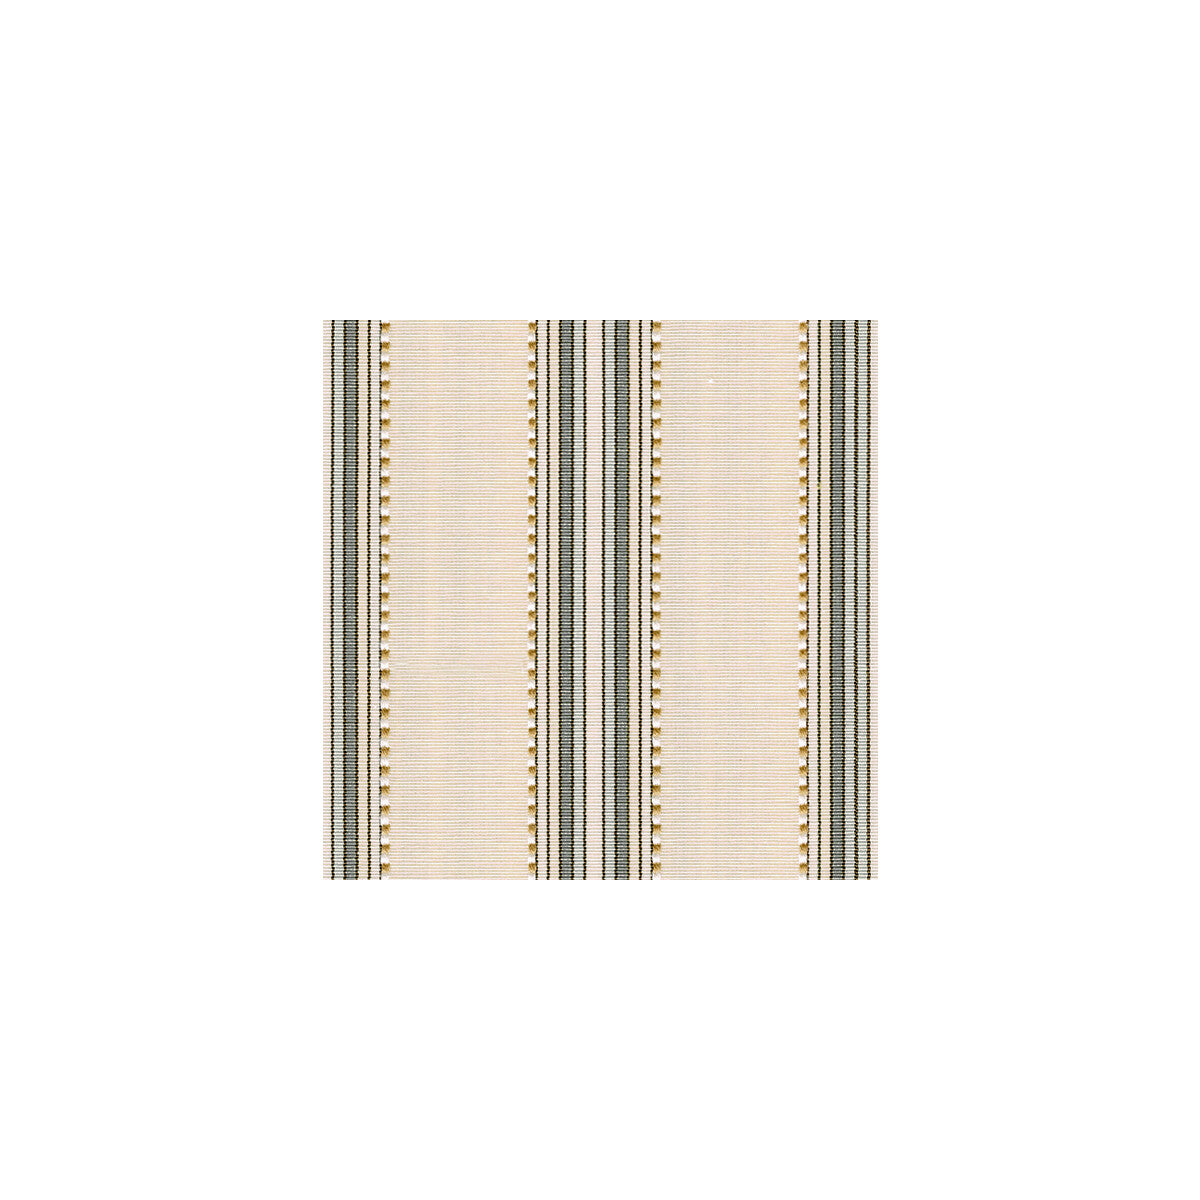 Sarala fabric in stone color - pattern 31235.16.0 - by Kravet Basics in the The Echo Design collection